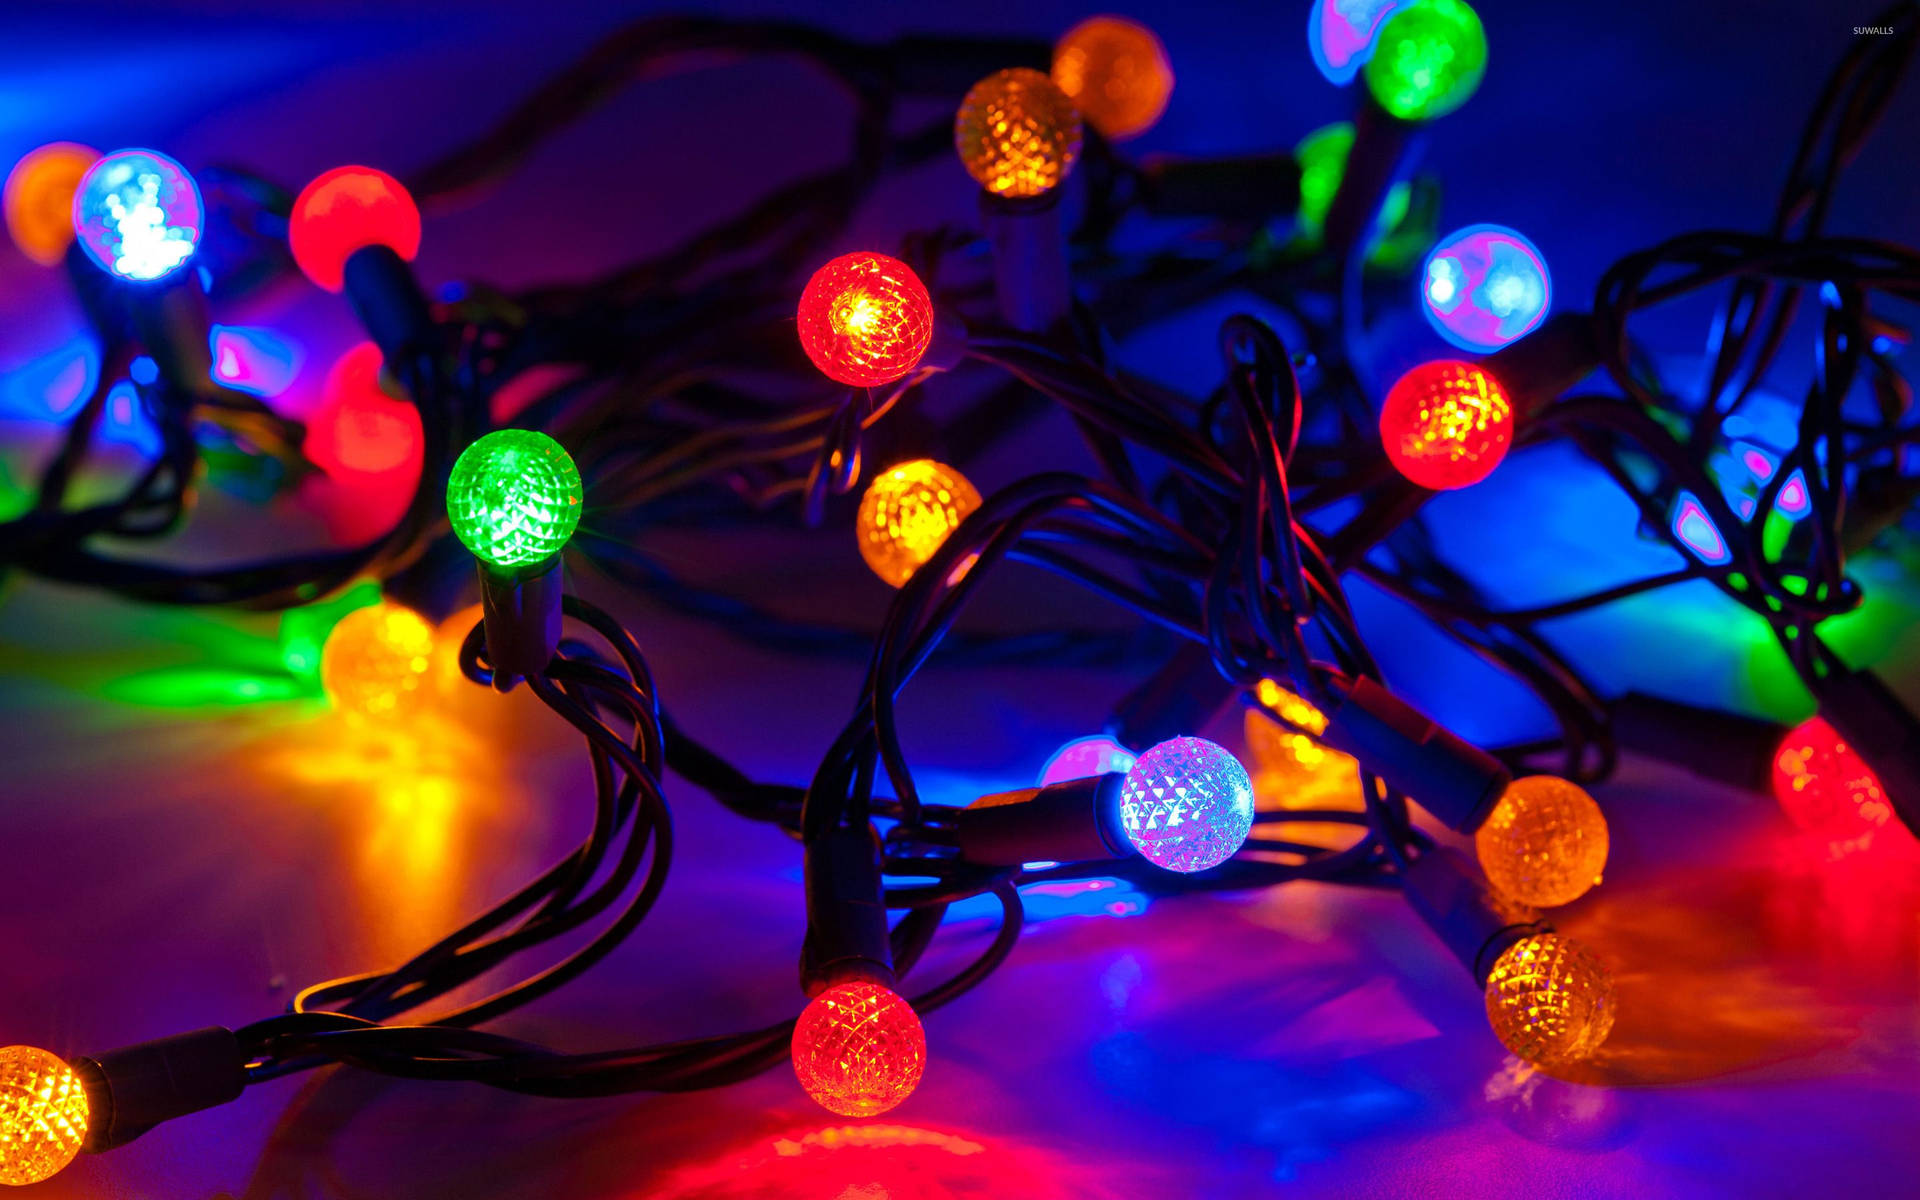 Bring Joy to the World - Colorful Christmas Lights Wallpaper